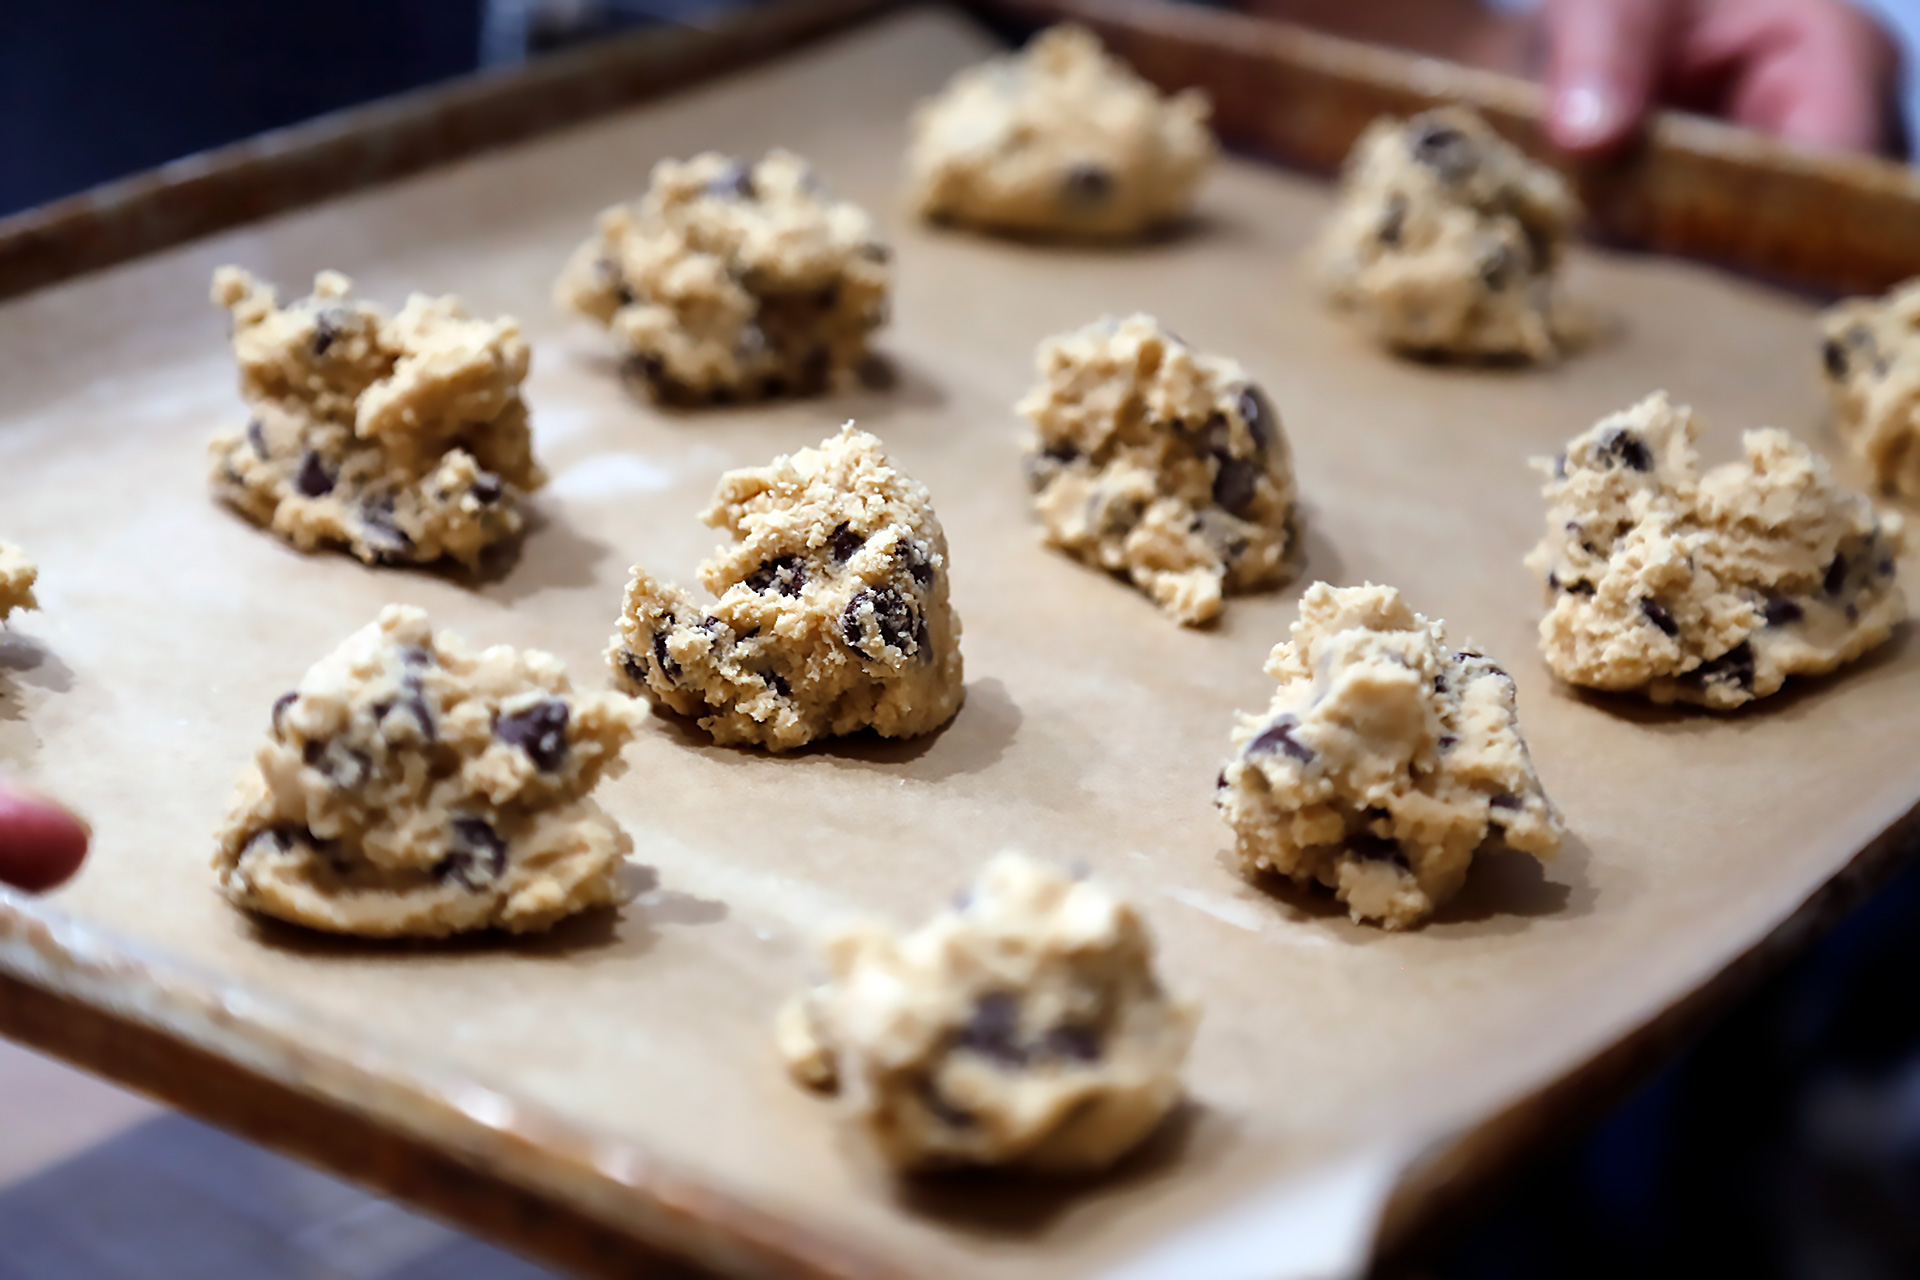 Drop the dough by heaping tablespoonfuls onto the baking sheet, spacing them evenly.